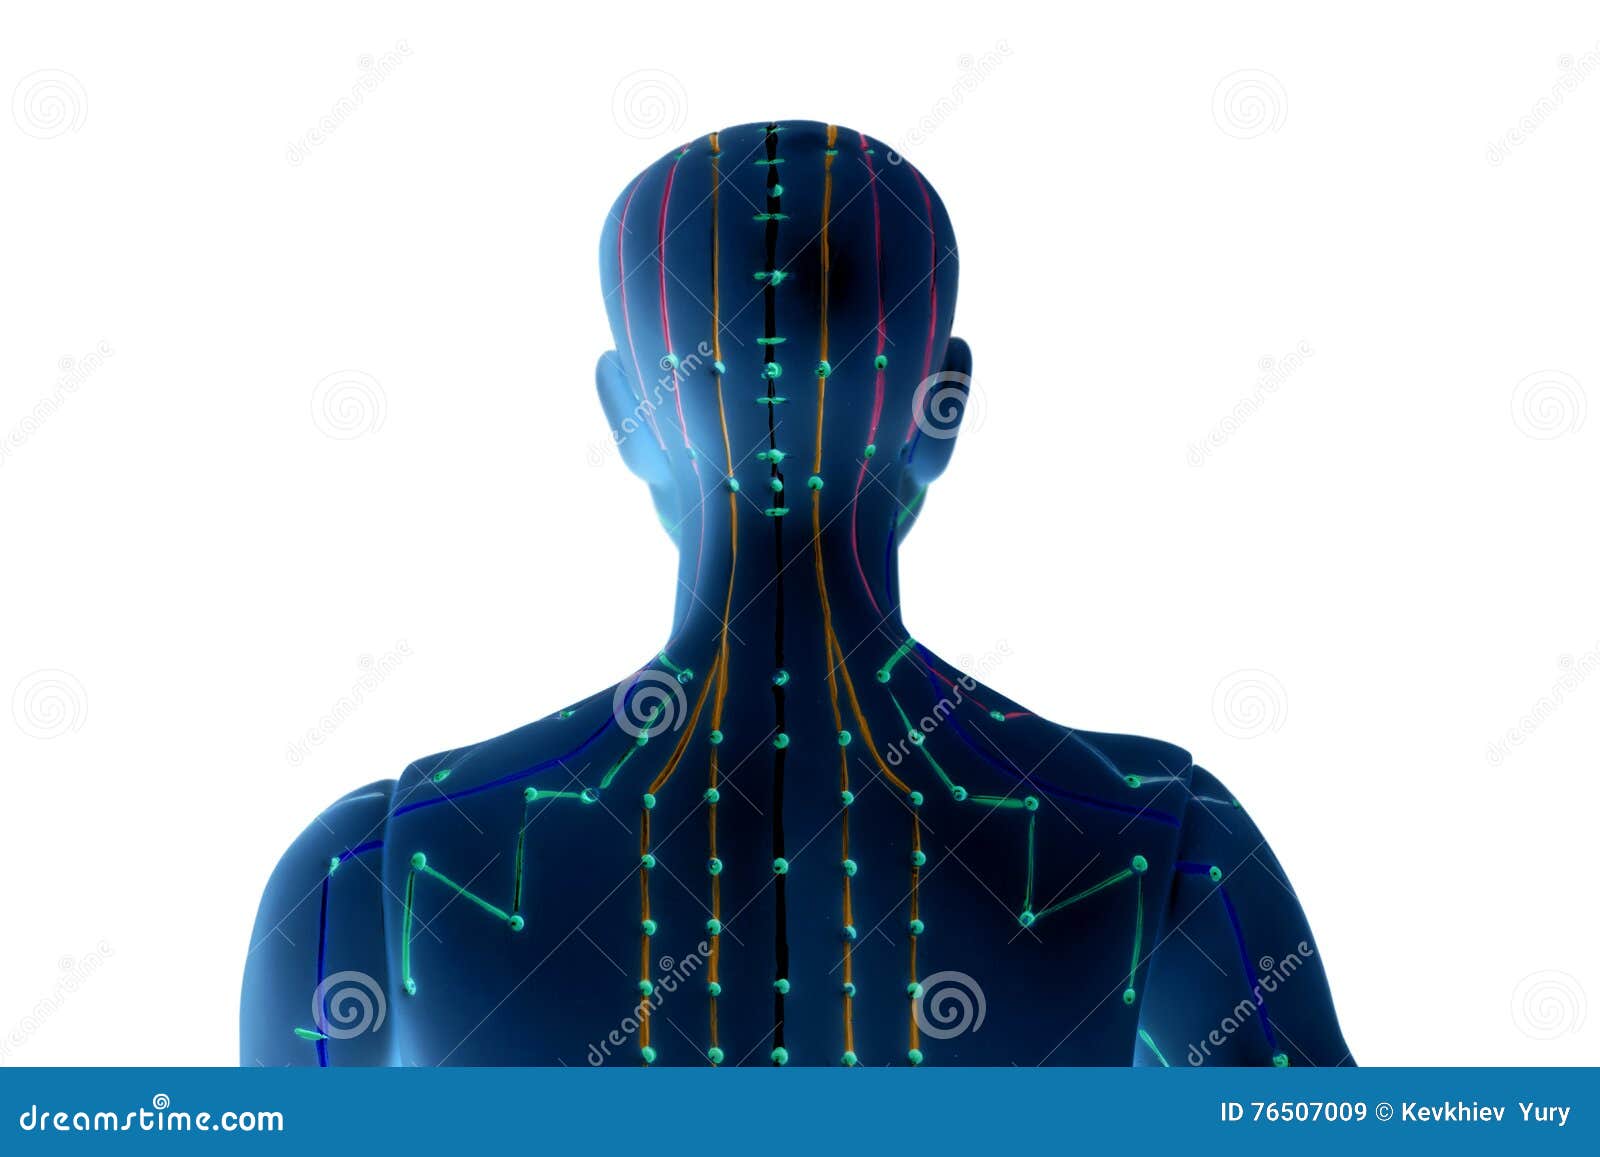 medical acupuncture model of human on white